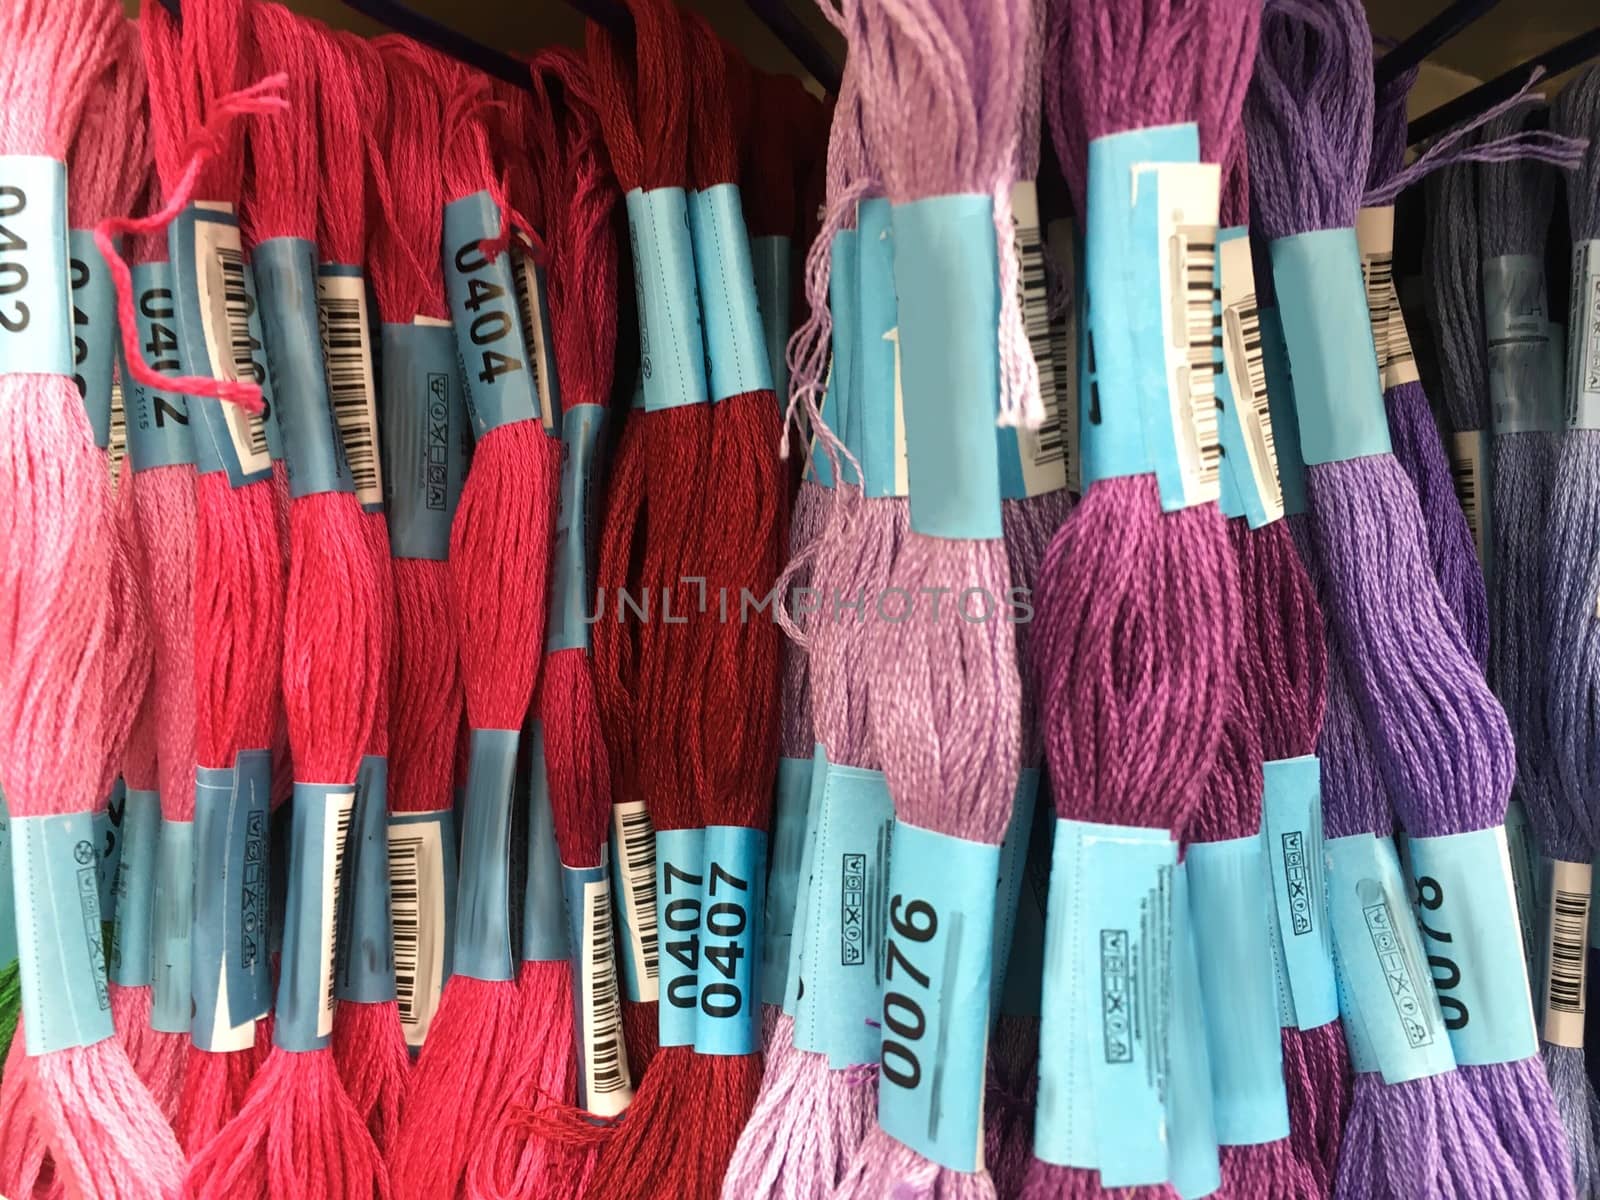 sewing threads for embroidery  view on sewing shop shelves with various knitting yarn, Numbered samples colored threads